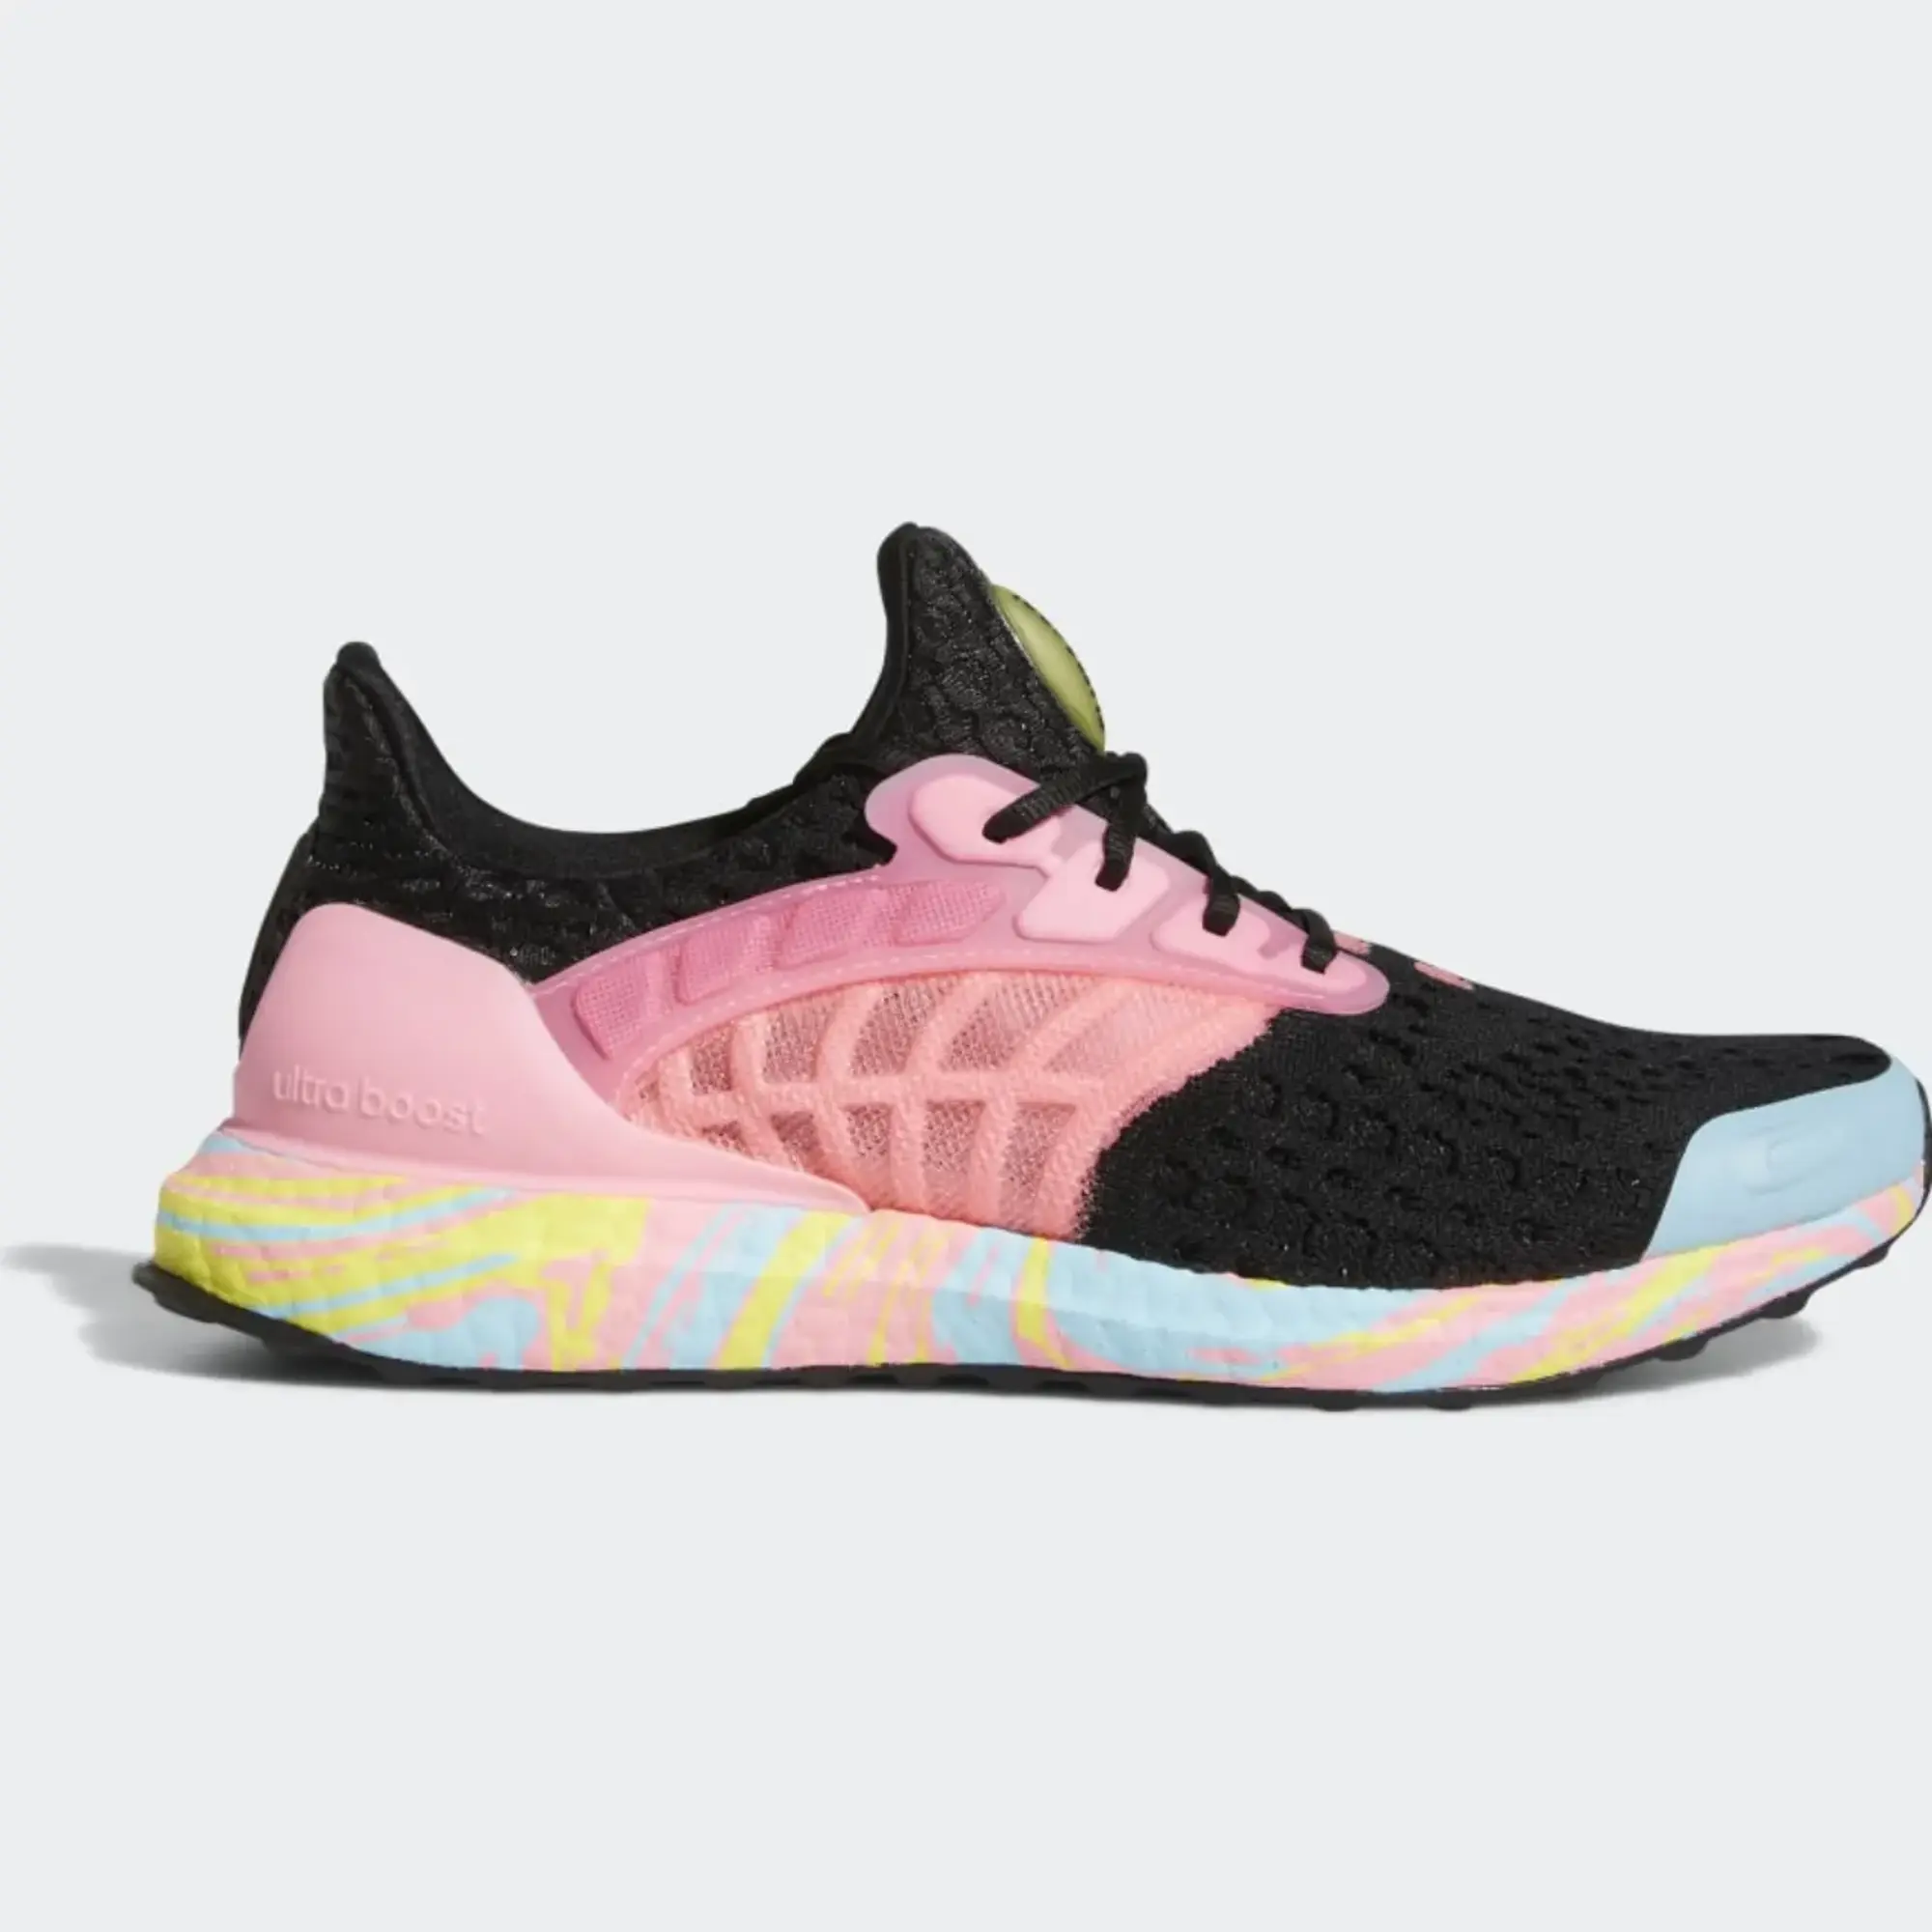 adidas Ultra Boost Clima Cool 2 DNA Beam Pink